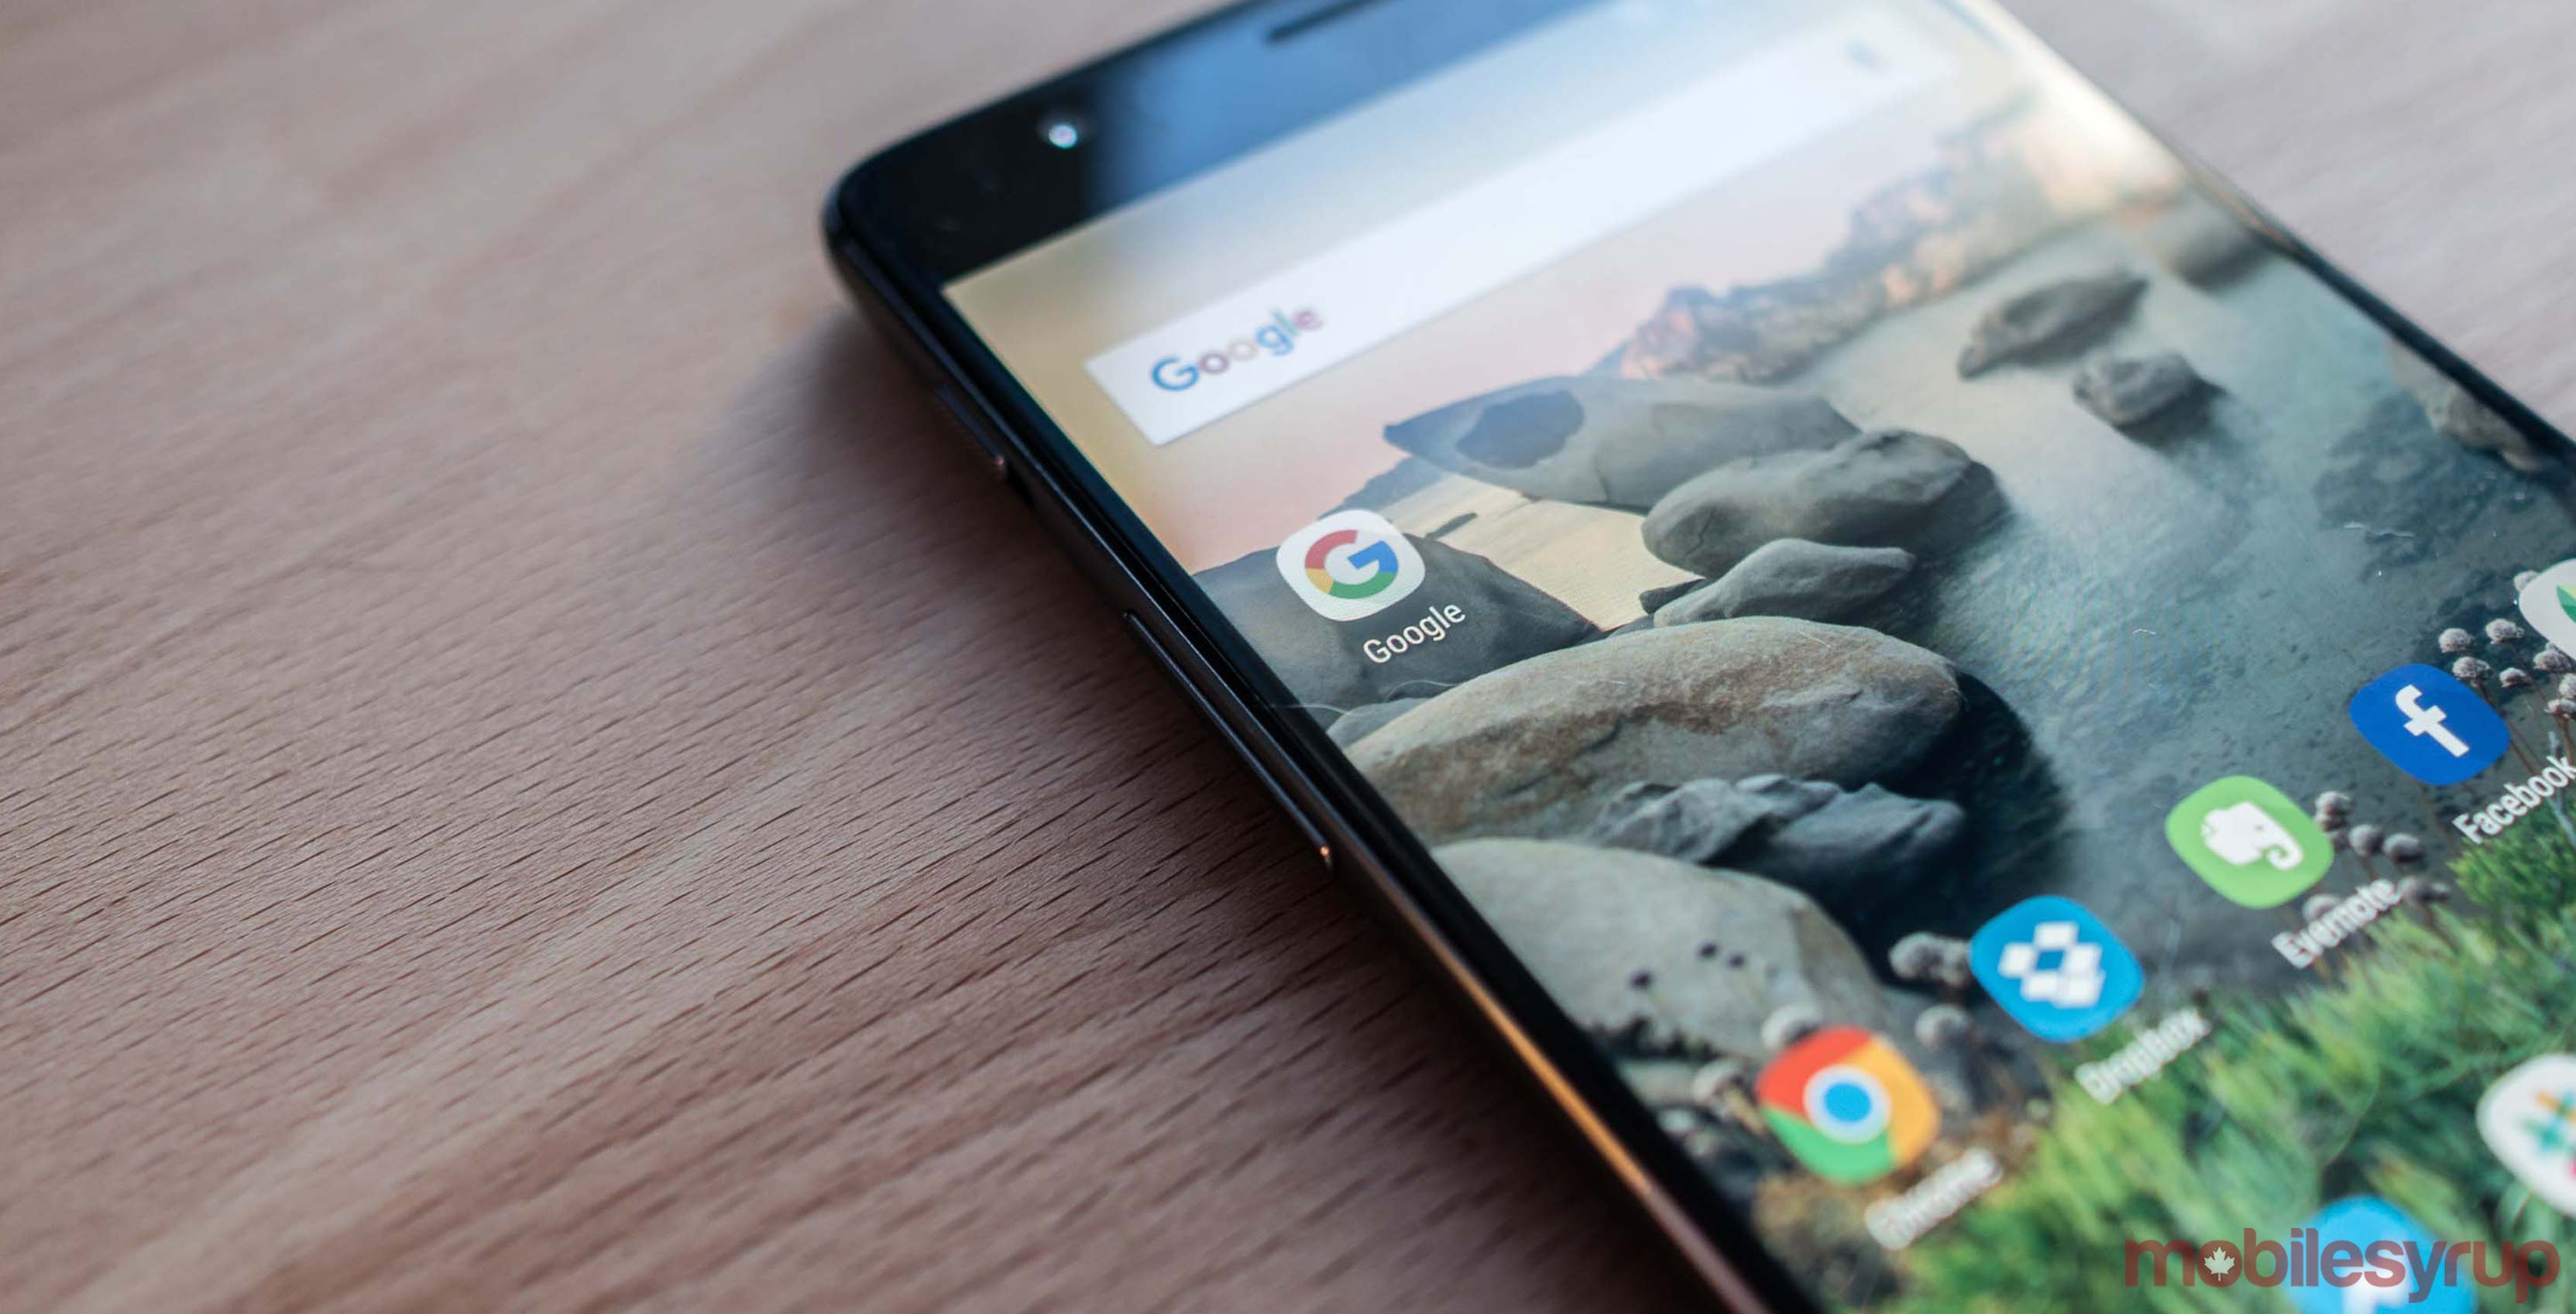 The Google Android Search app icon on OnePlus 3T